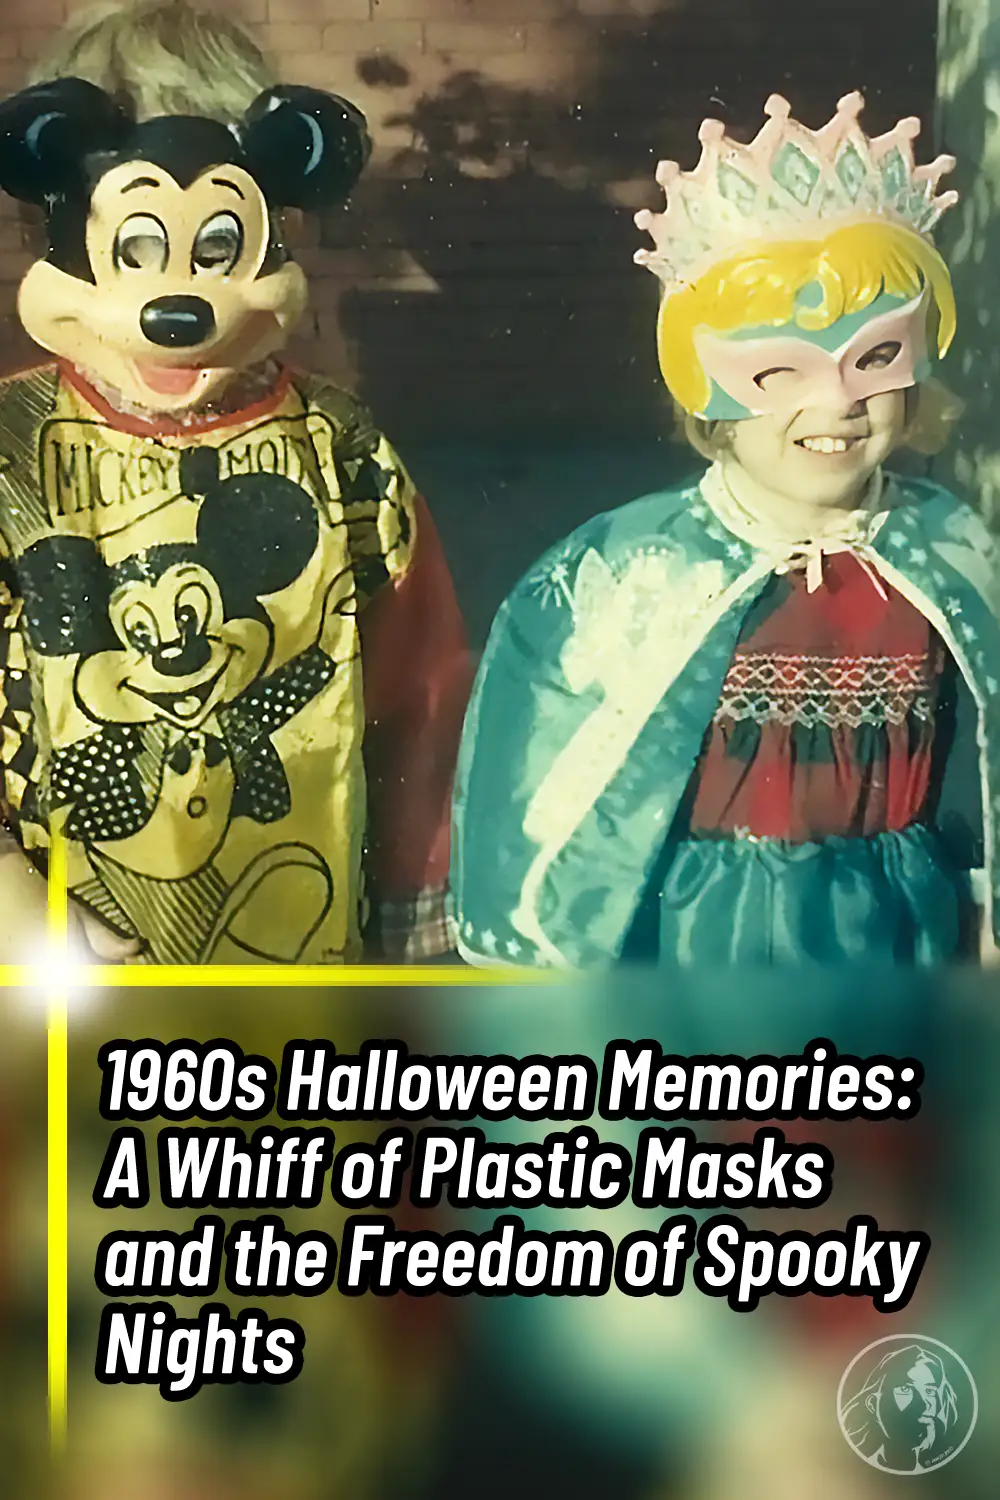 1960s Halloween Memories: A Whiff of Plastic Masks and the Freedom of Spooky Nights